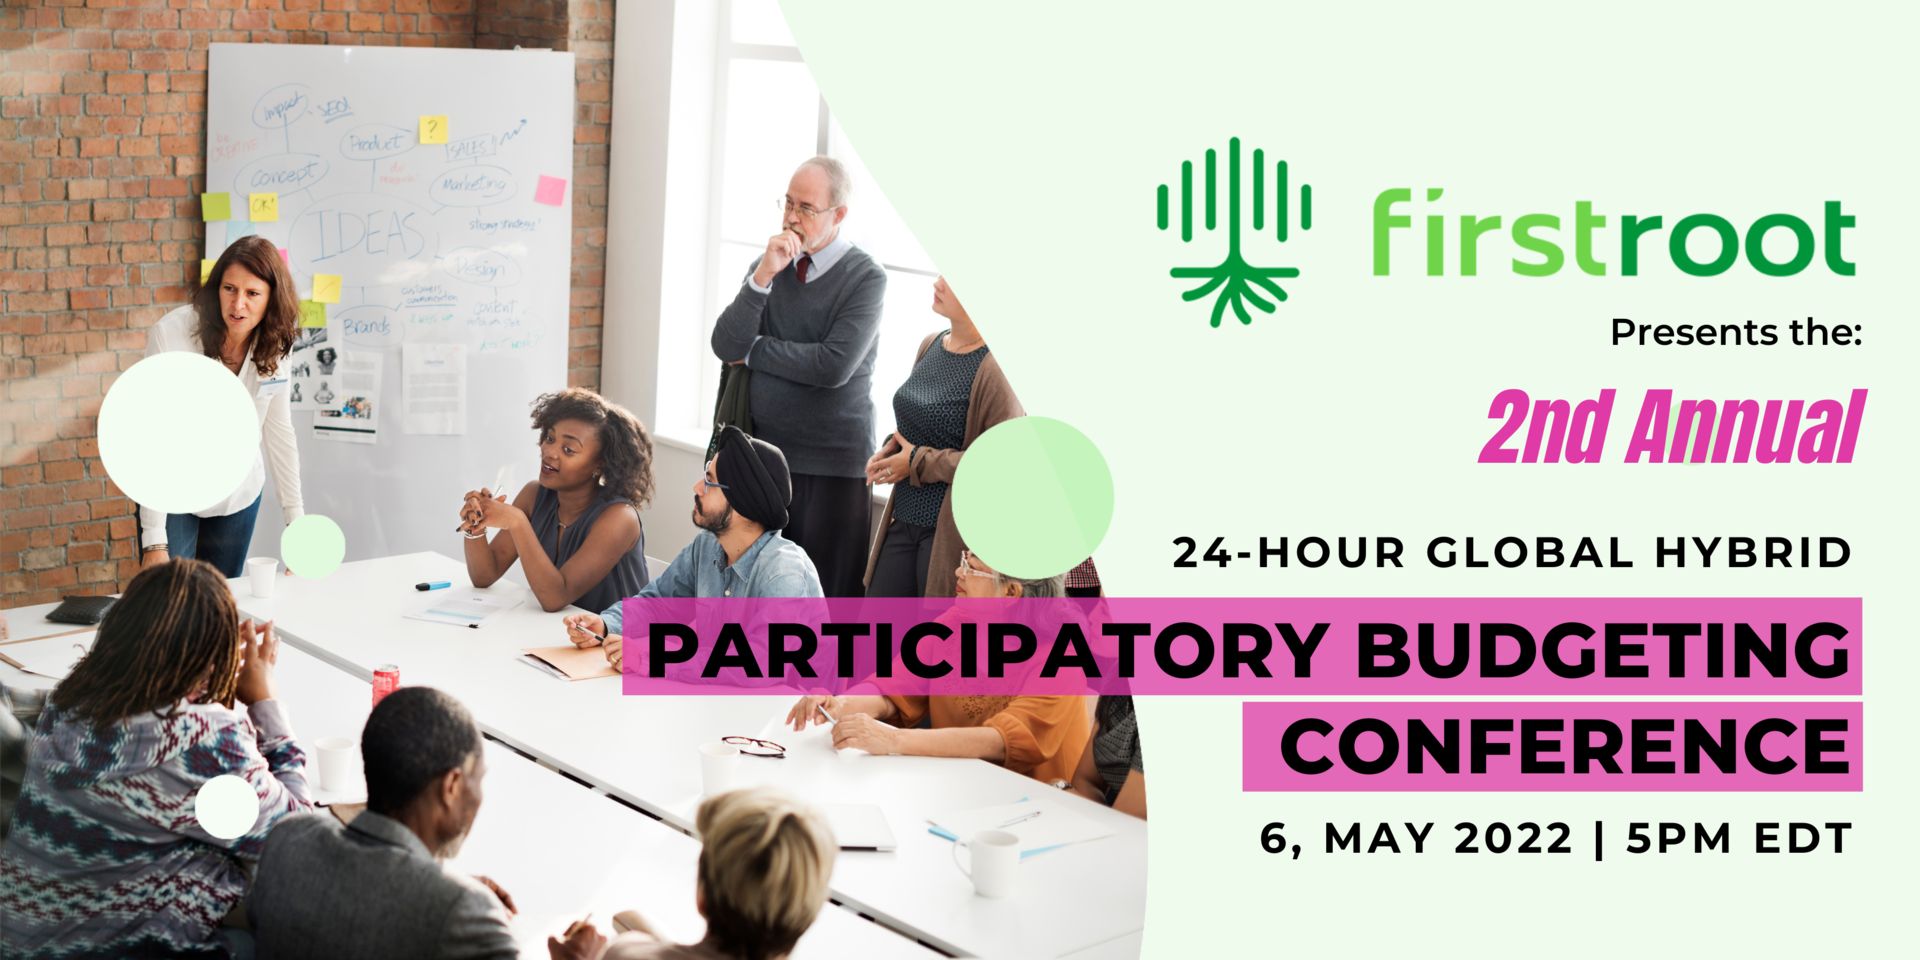 FirstRoot's 2nd Annual 24-Hour Global Financial Literacy and PB Conference